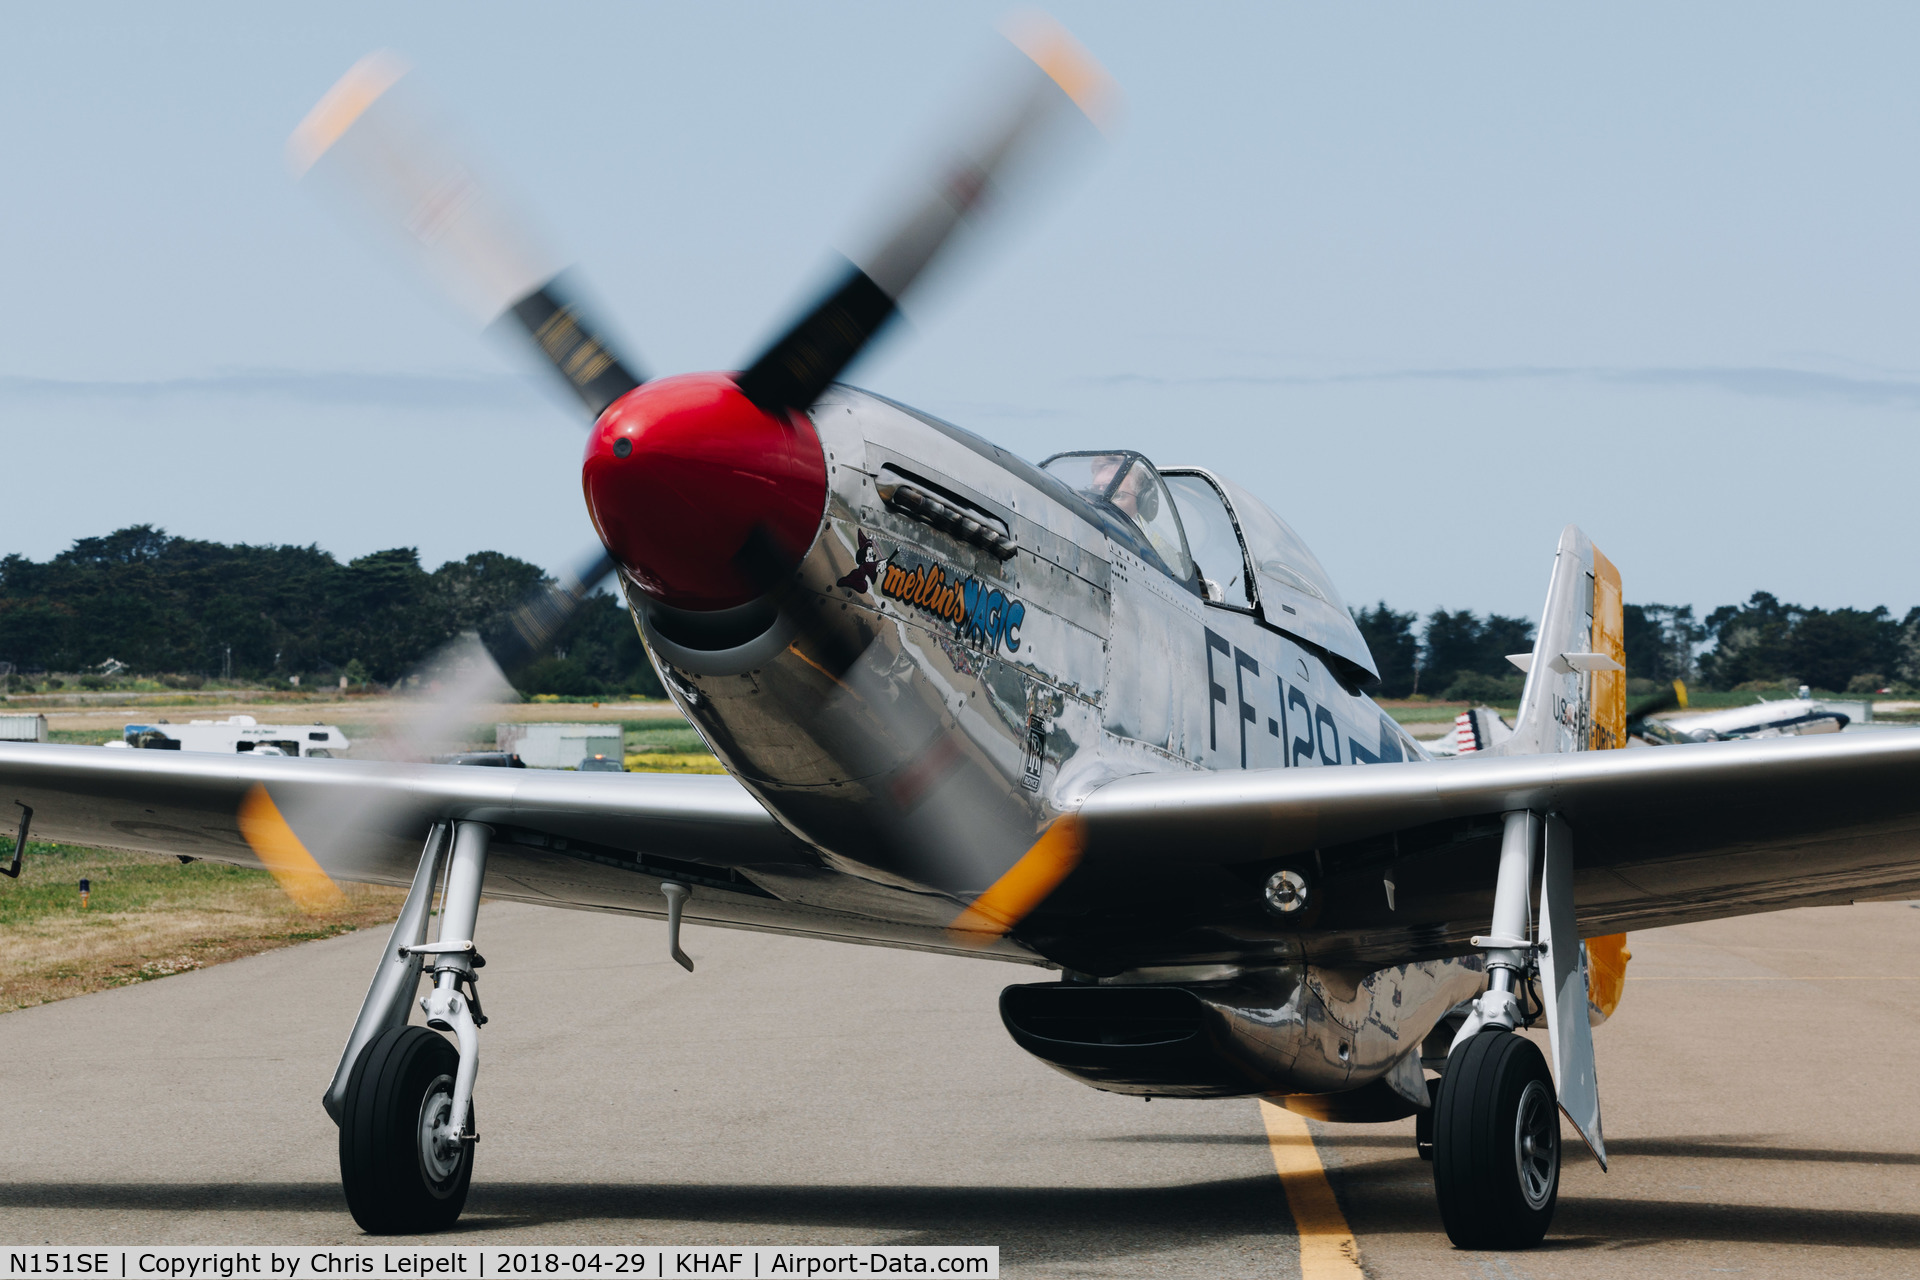 N151SE, 1944 North American P-51D Mustang C/N 122-39588 (44-73129), 1944 P-51D Mustang taxing out for departure at Half Moon Bay Airport Day 2018.